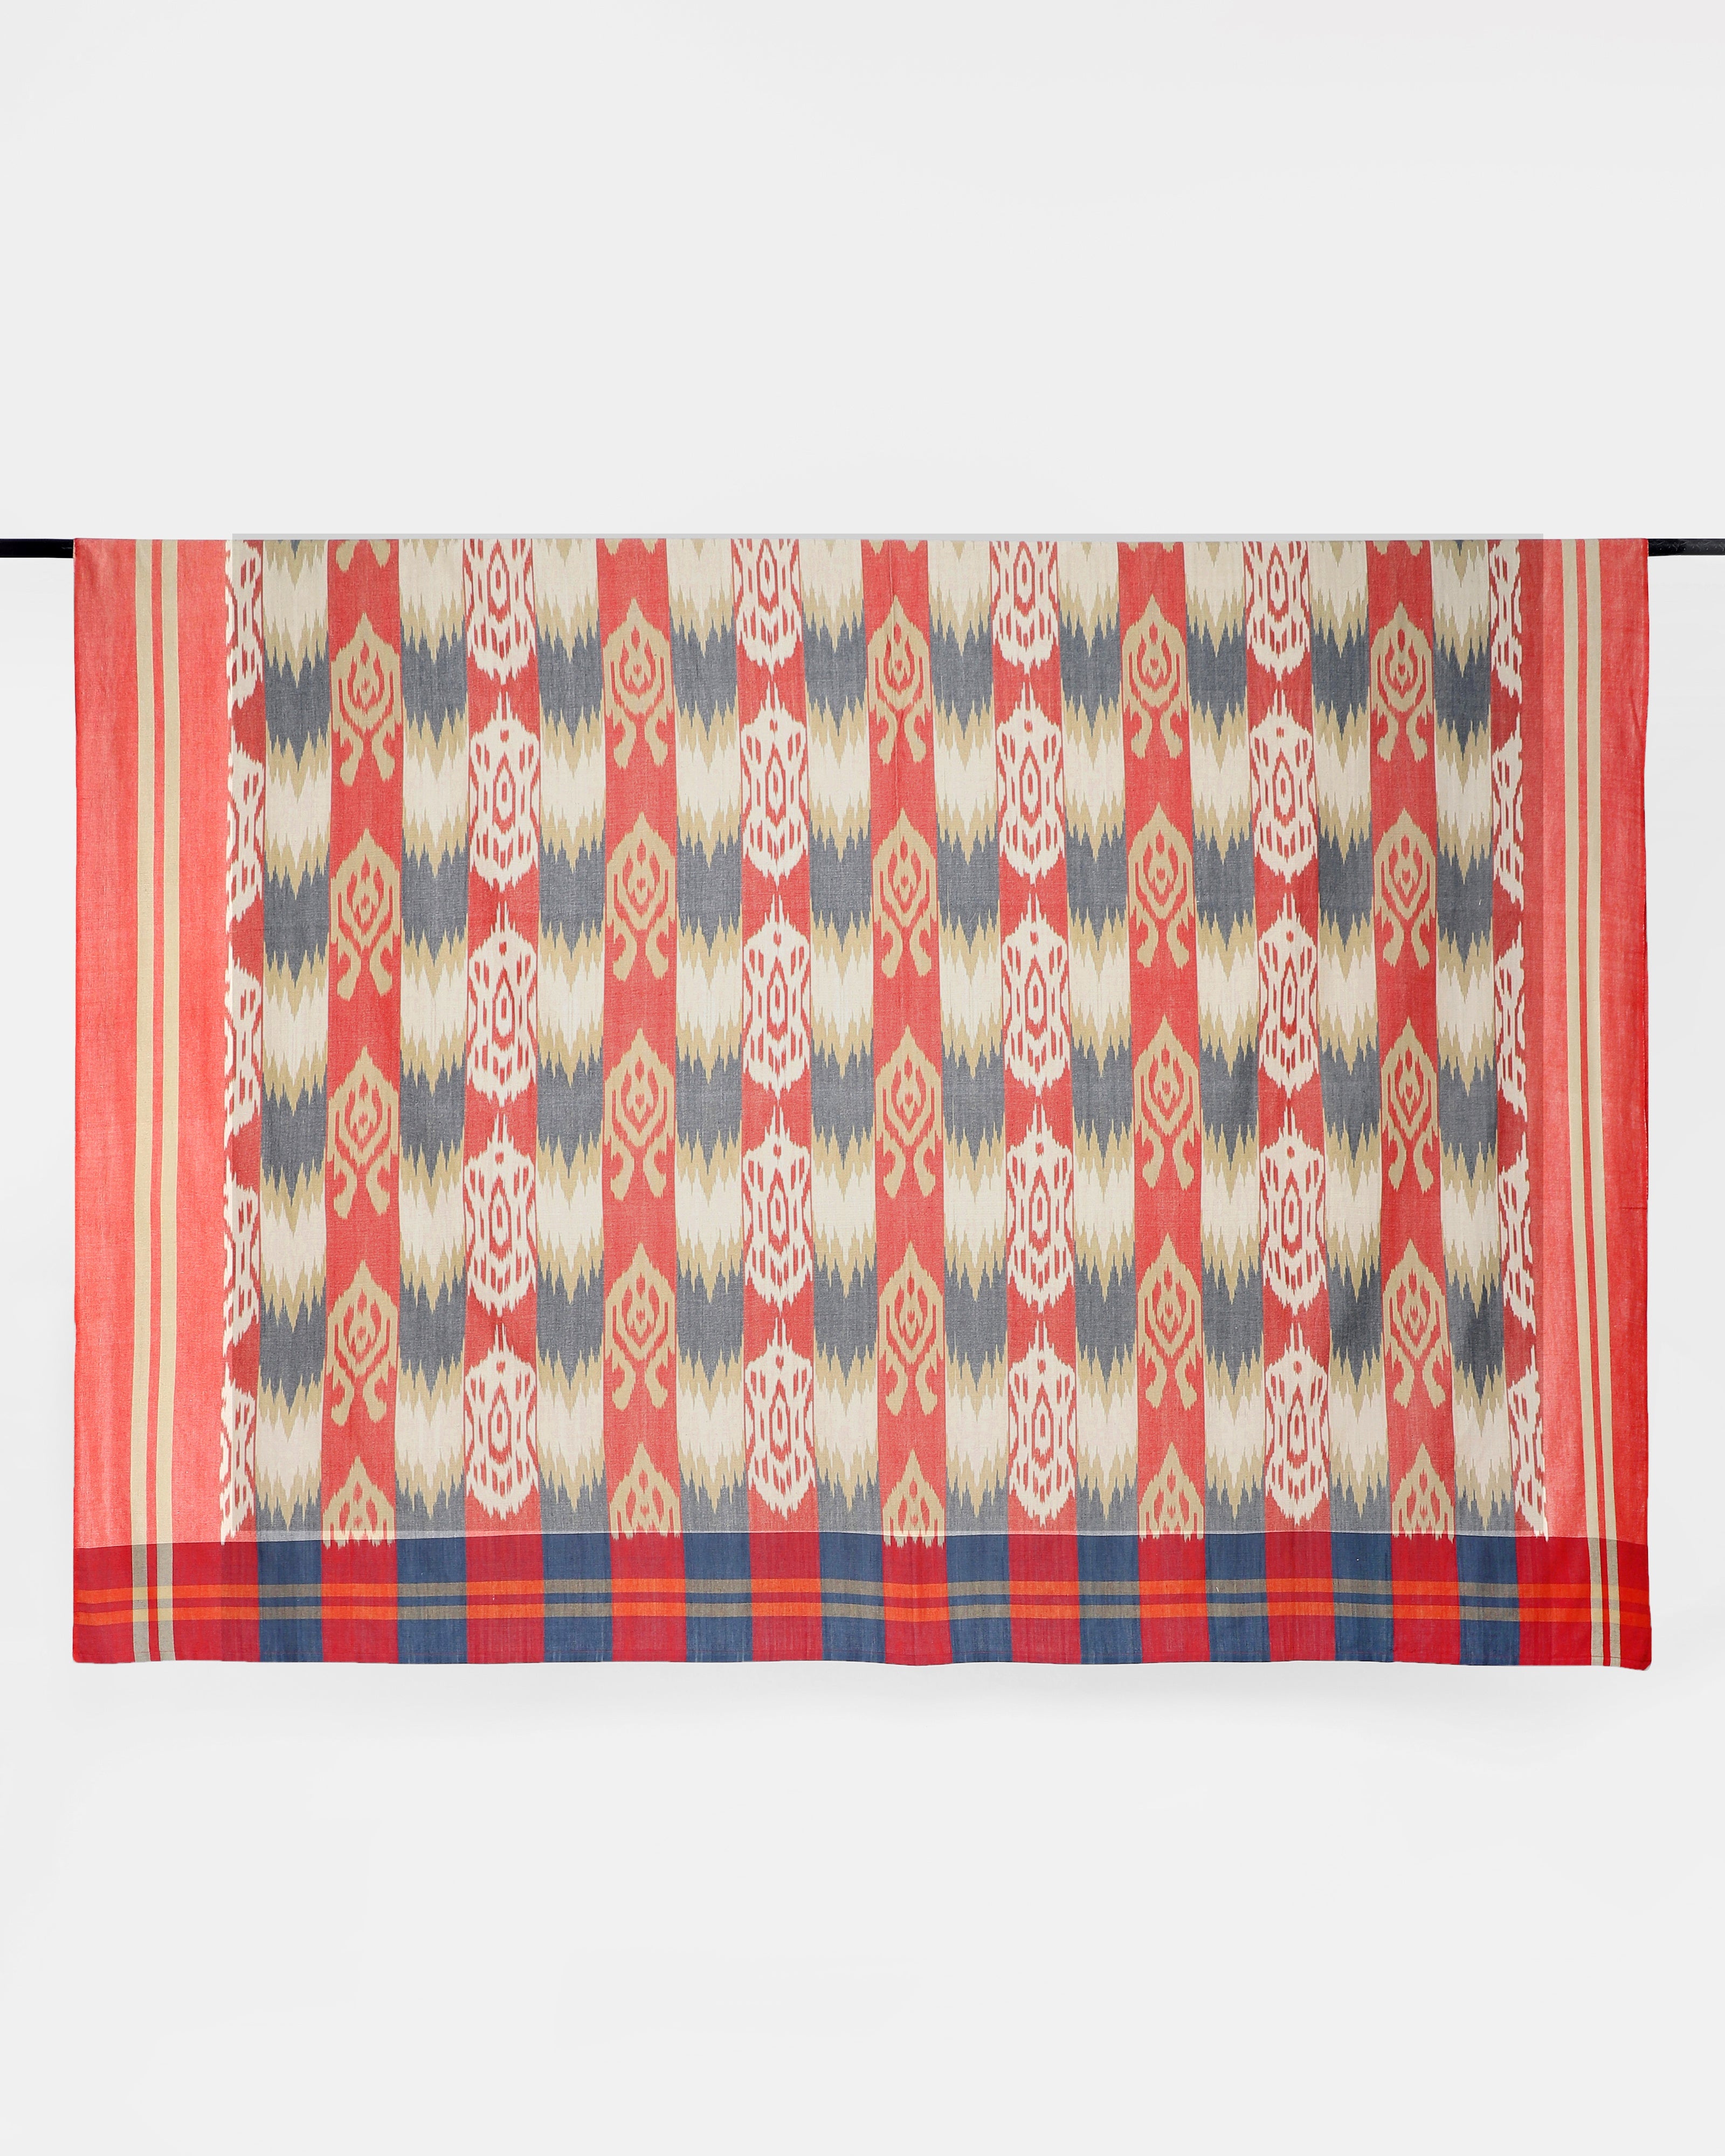 Feray Warp Ikat Cotton Bed Cover